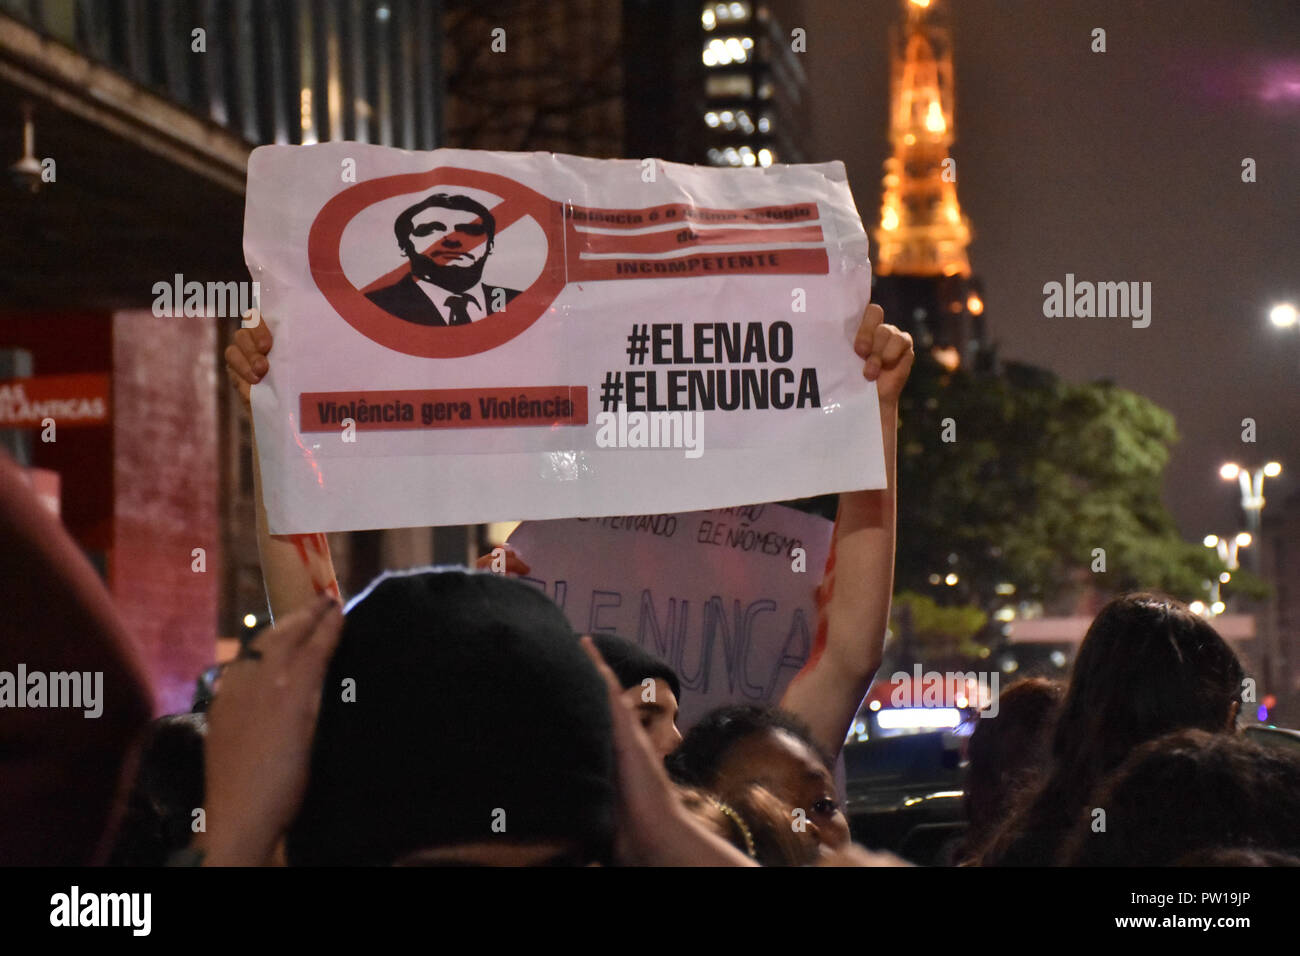 SÃO PAULO, SP - 11.10.2018: MANIFESTAÇÃO CONTRA O FASCISMO EM SP - It happened this Thursday, (11) in São Paulo, a demonstration against fascism. During the protest protesters sang, and held banners and posters against the candidate for President of the Republic Jair Bolsonaro. (Photo: Roberto Casimiro/Fotoarena) Stock Photo